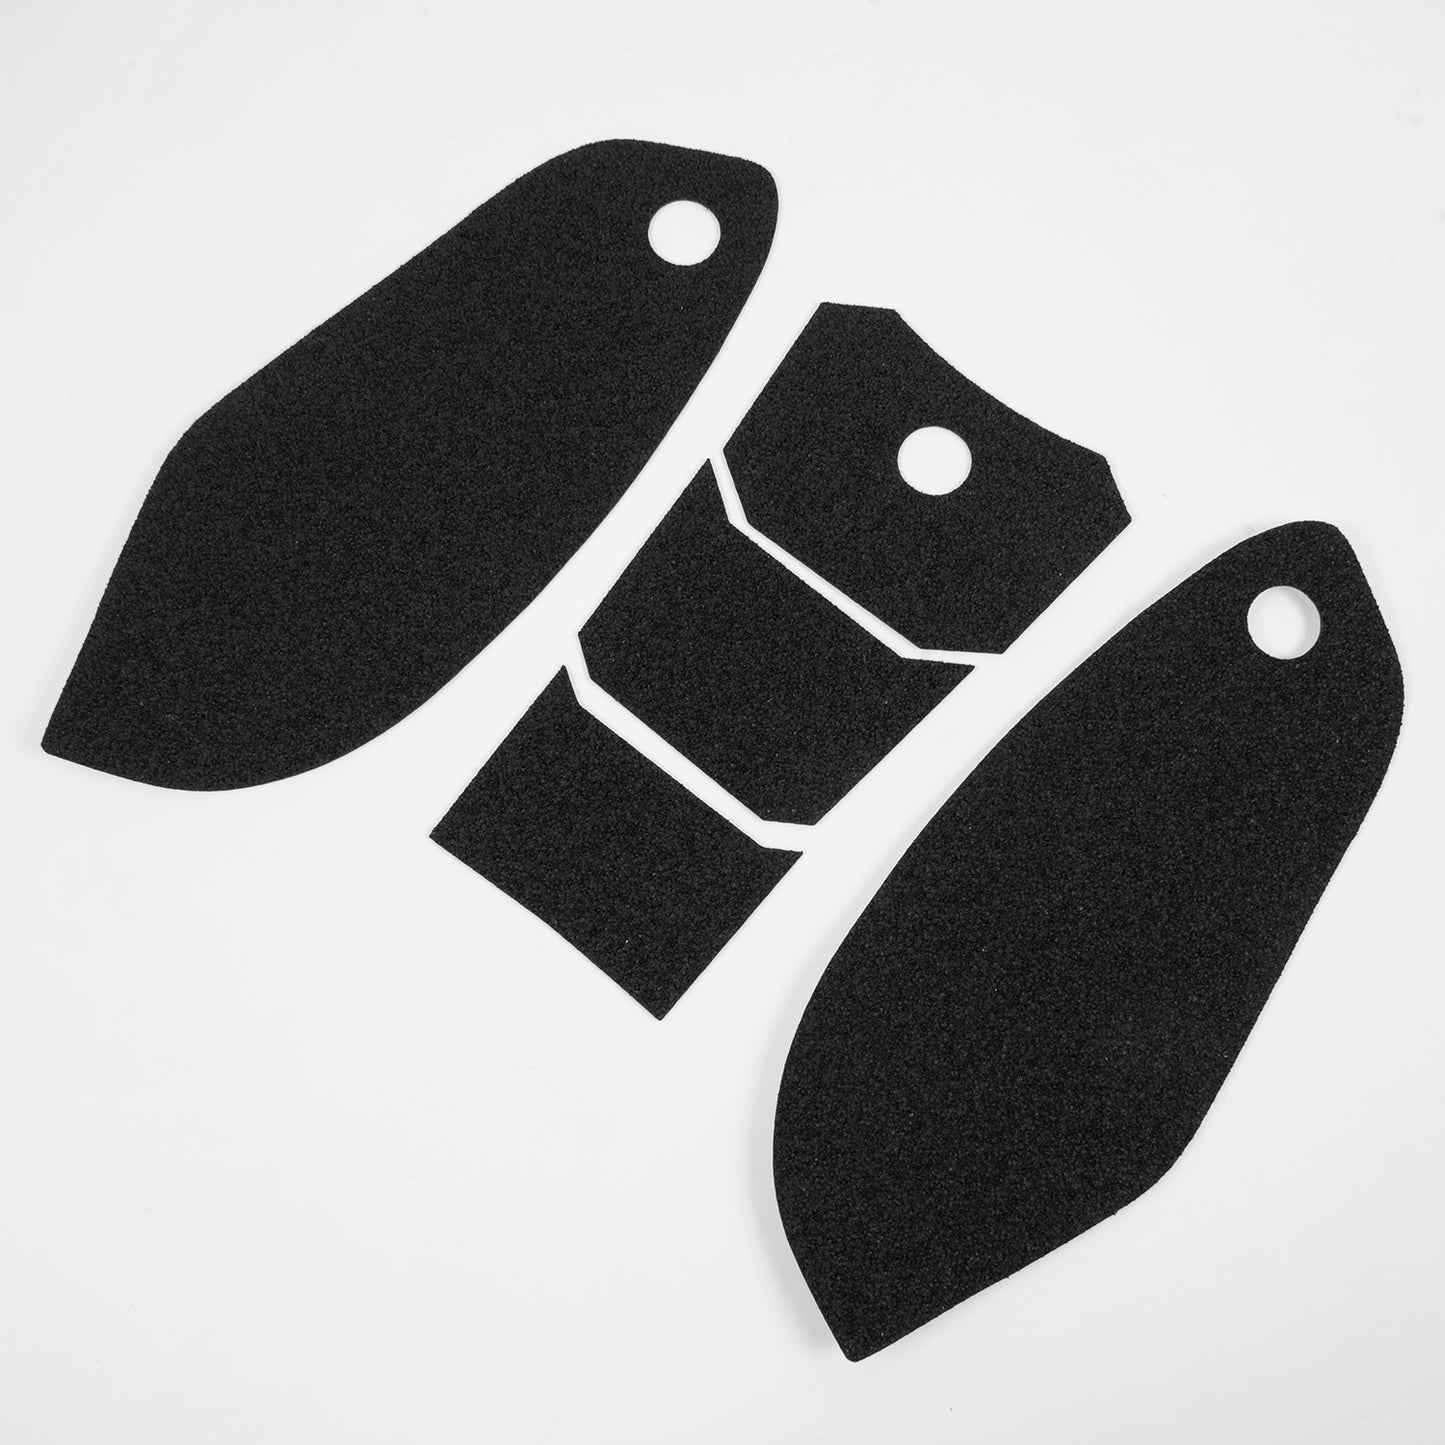 Wolfline Motorcycle Anti Slip Tank Pad Stickers Side Gas Tank Pad Knee Grip Decals Protection For Yamaha R6 2004 2005 2006 2007 2008 2009 2010 2011 2012 2013 2014 2015 2016